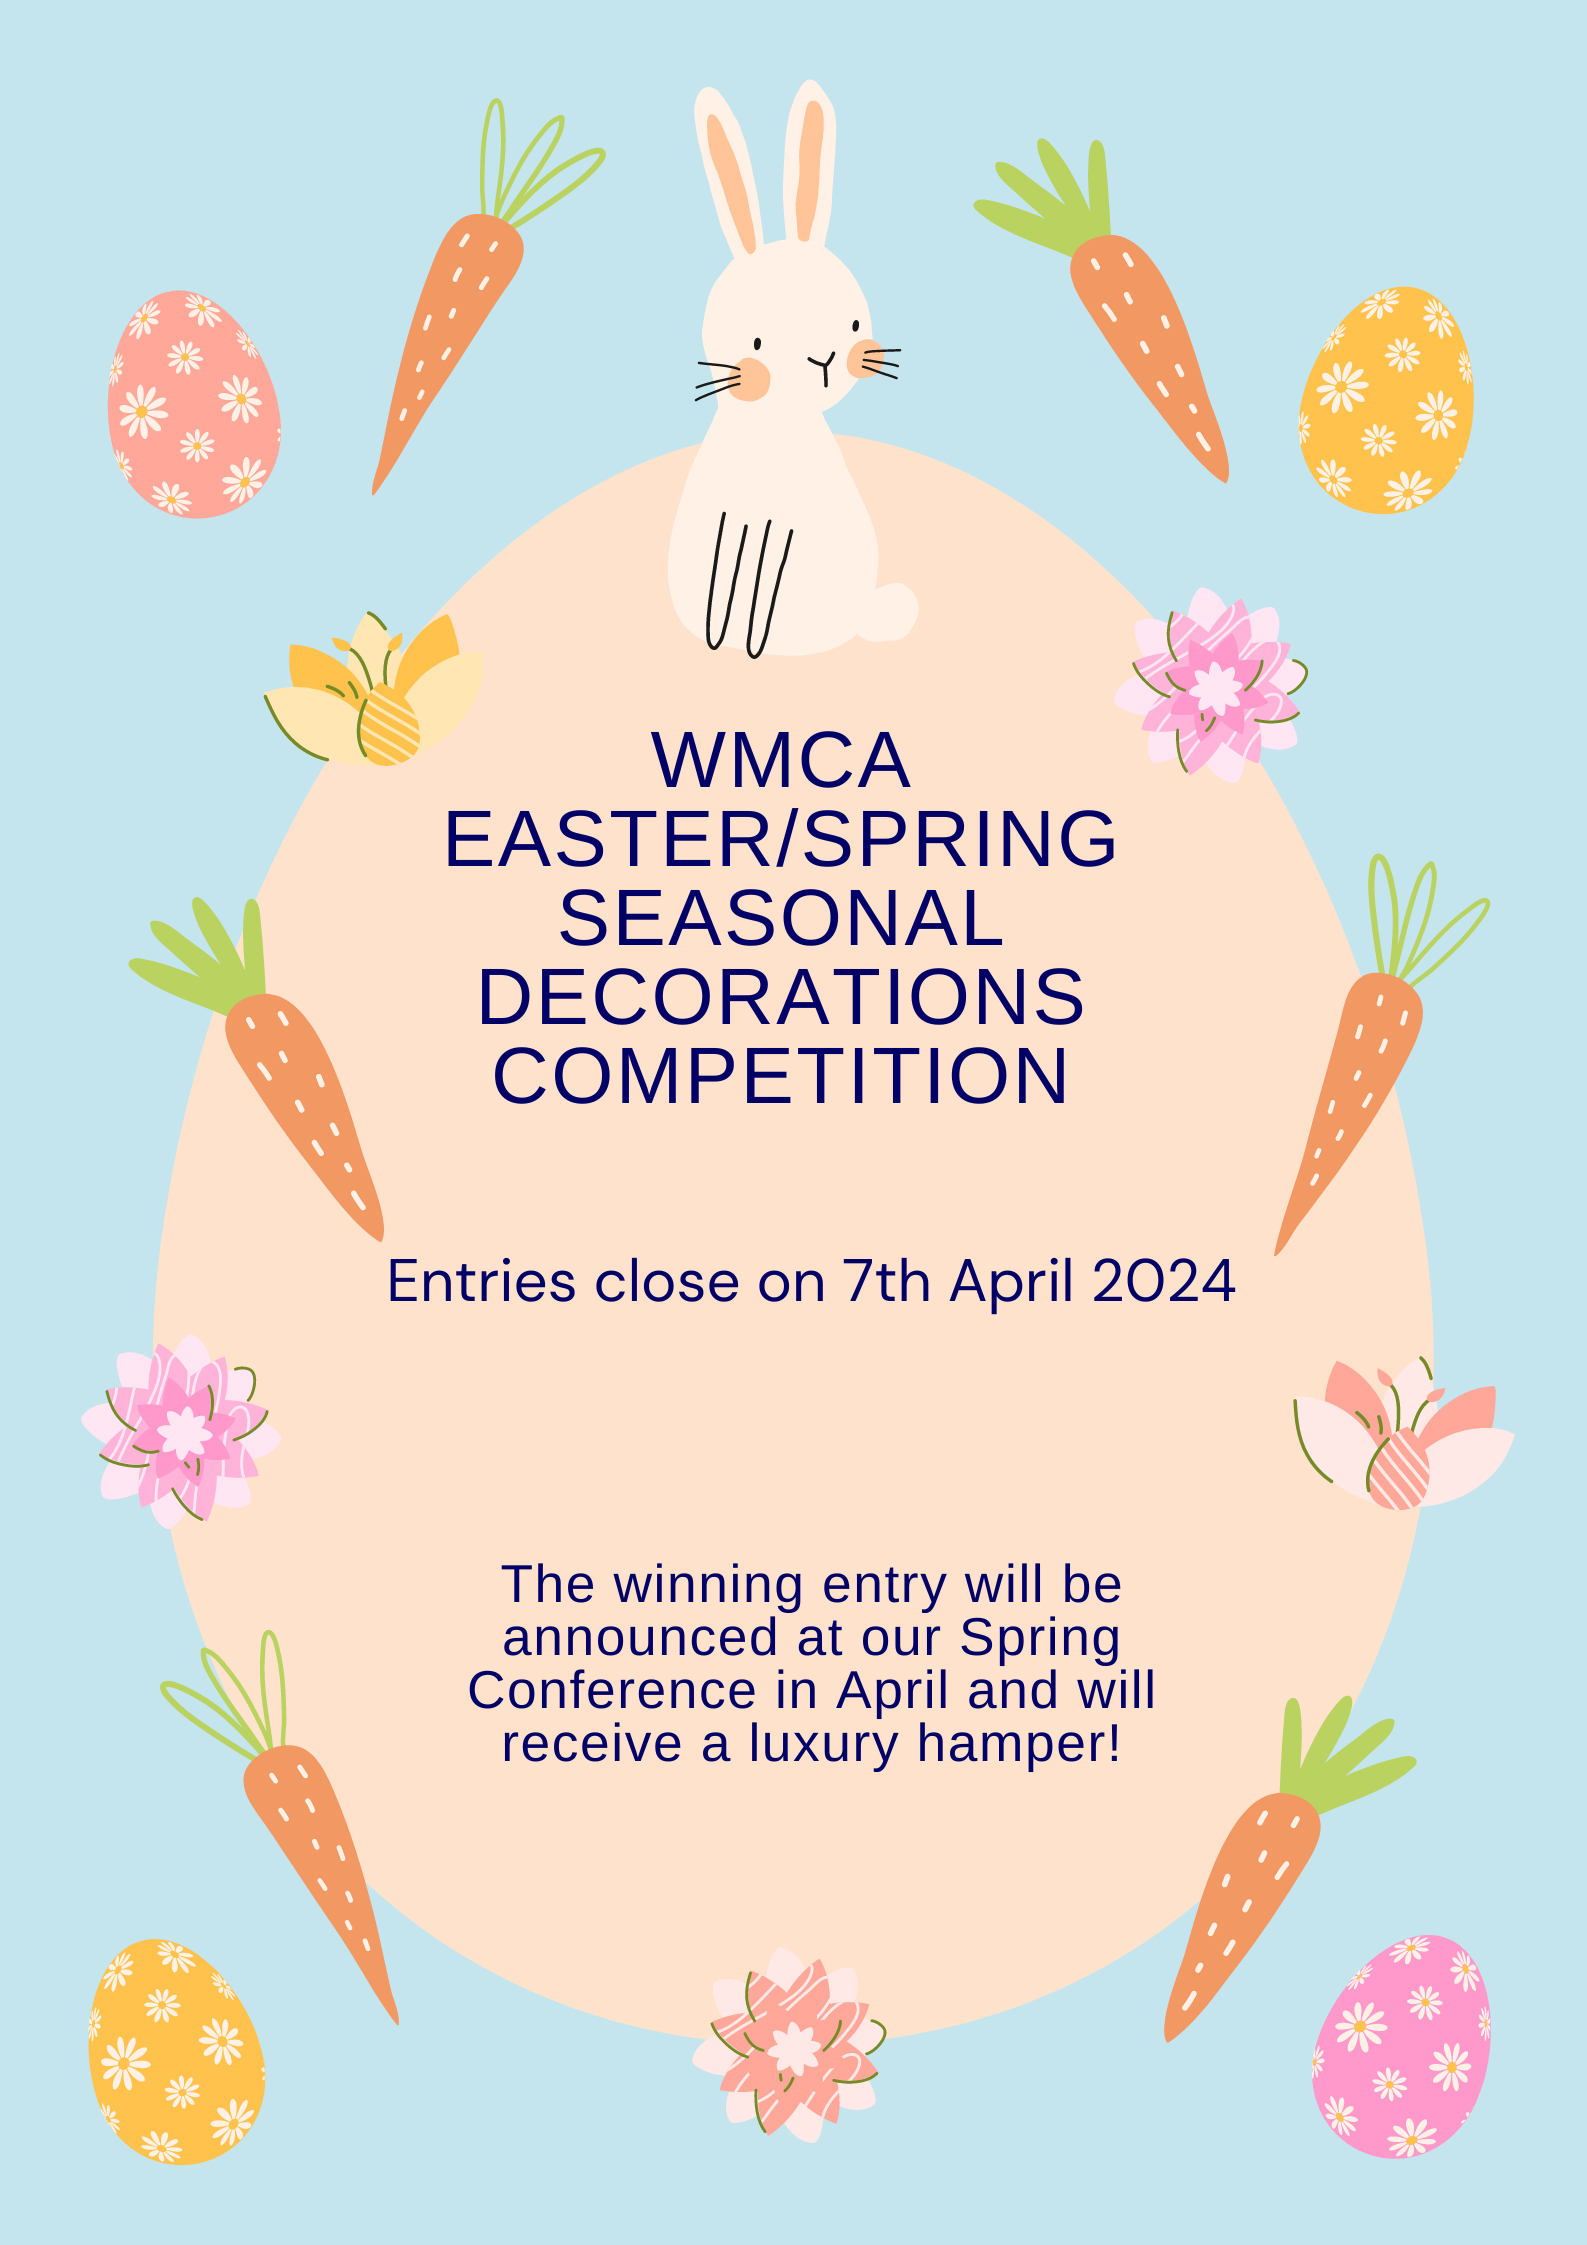 https://stratus.campaign-image.eu/images/32883000015497739_zc_v1_1711461954343_wmca_easterspring_seasonal_decorations_competition.png